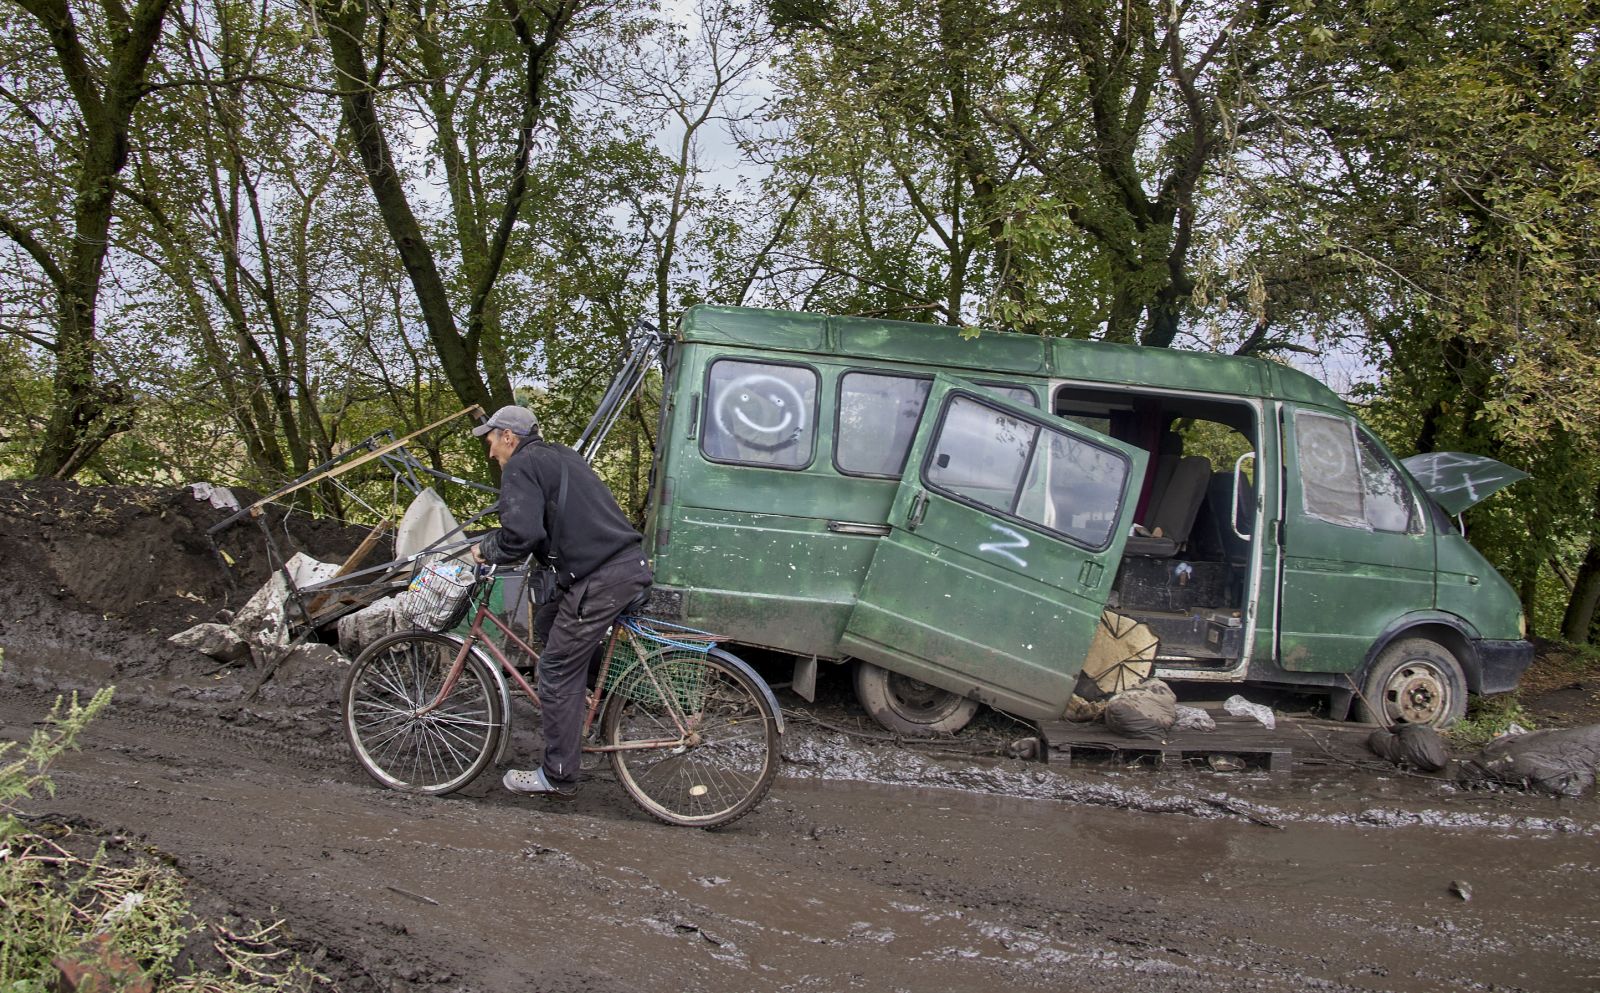 epa10182258 A local man rides a bicycle past a damaged car with the Z symbol on a road near the recently recaptured city of Balakliia in Kharkiv's area, Ukraine, 13 September 2022. The Ukrainian army pushed Russian troops from occupied territory in the northeast of the country in a counterattack. Kharkiv and surrounding areas have been the target of heavy shelling since February 2022, when Russian troops entered Ukraine starting a conflict that has provoked destruction and a humanitarian crisis.  EPA/SERGEY KOZLOV